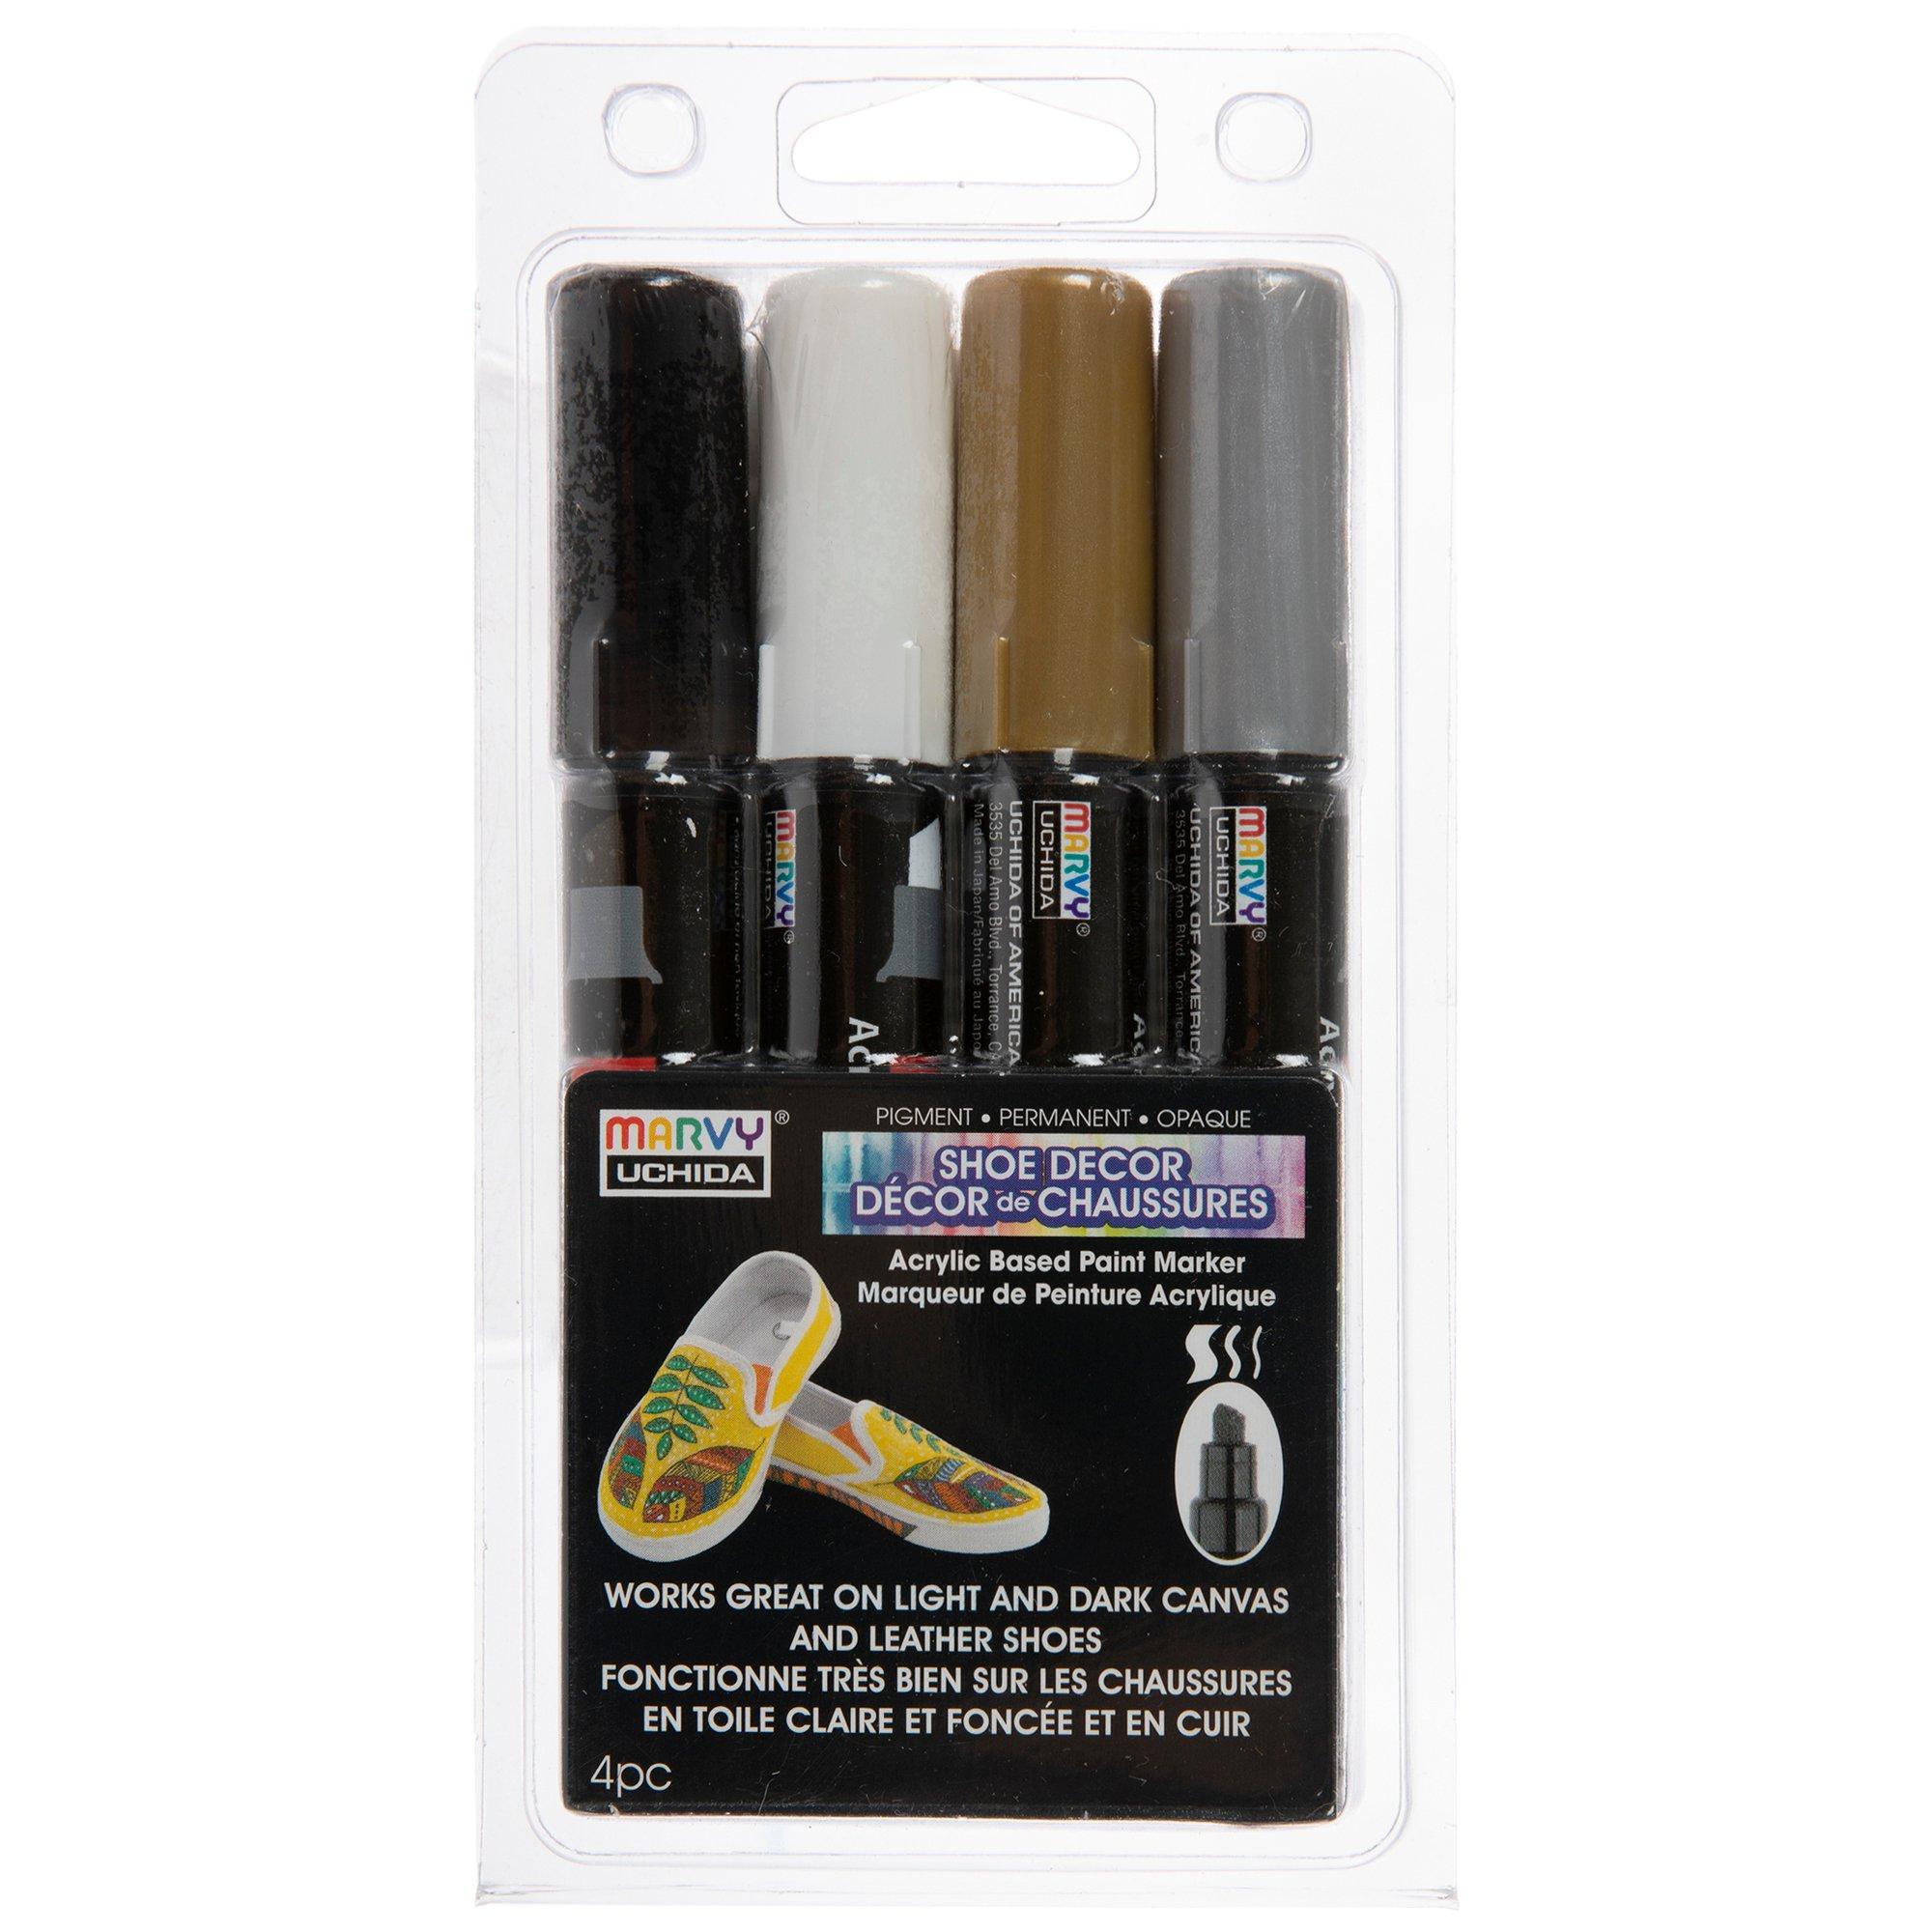 Dr. Paint Reversible Tip Paint Markers - 4 Piece Set, Hobby Lobby